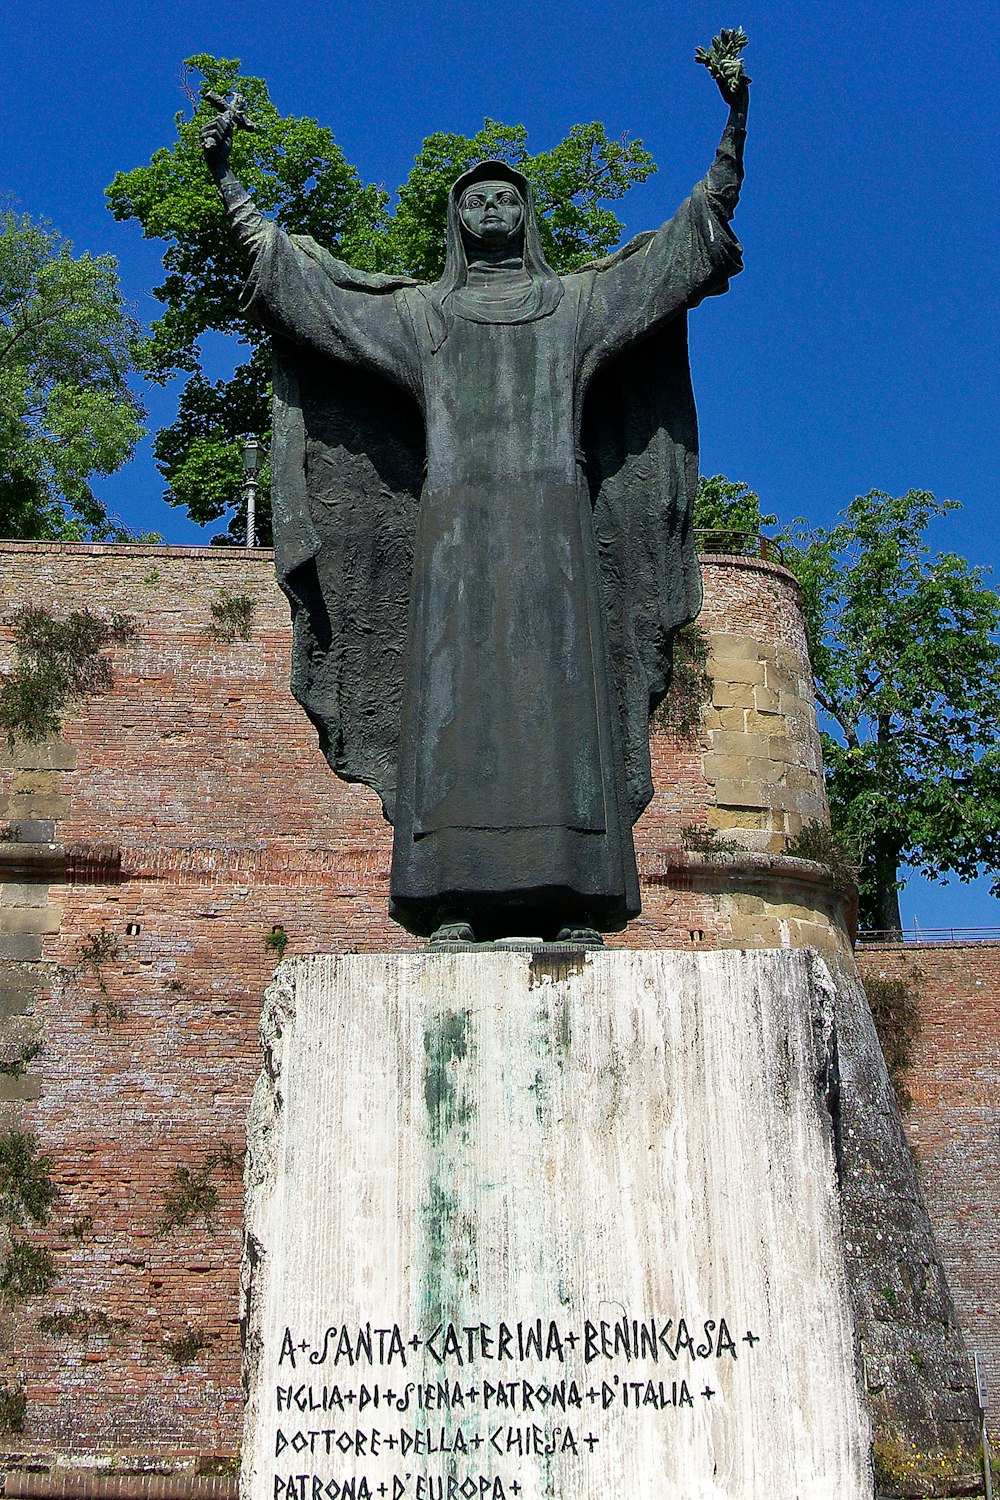 a statue of a man with his arms in the air